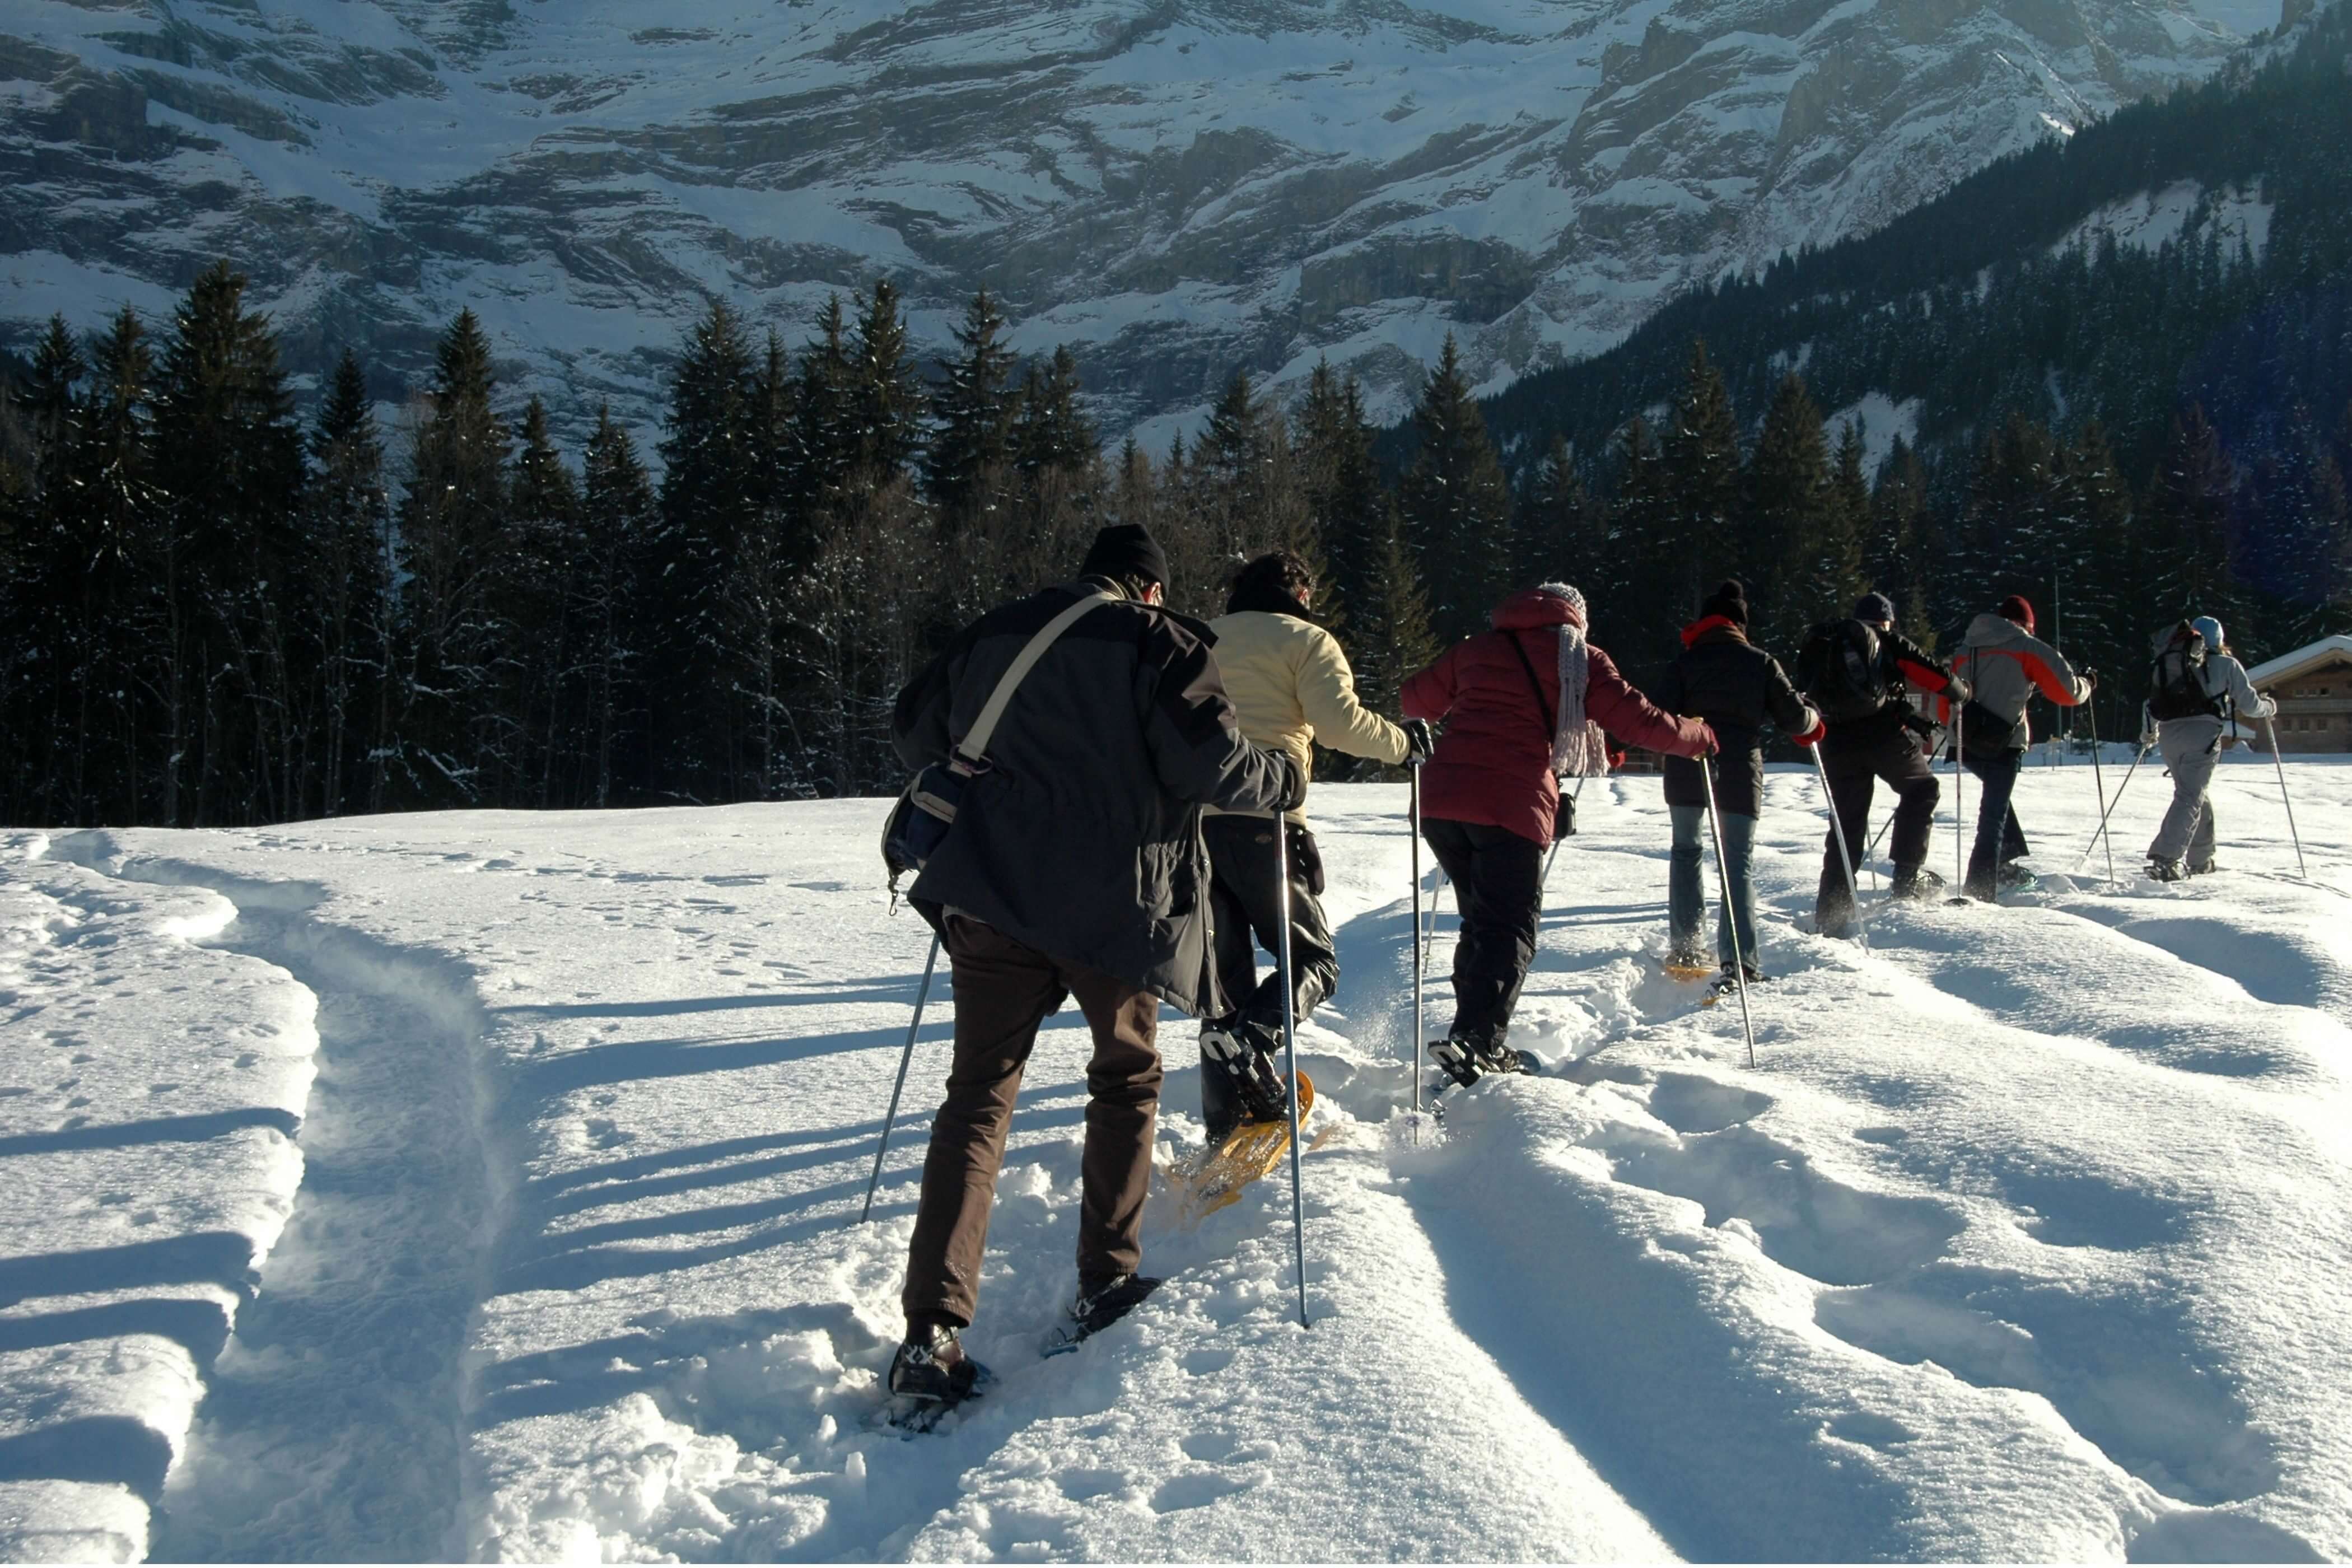 Group of people snowshoe hiking in the mountains.